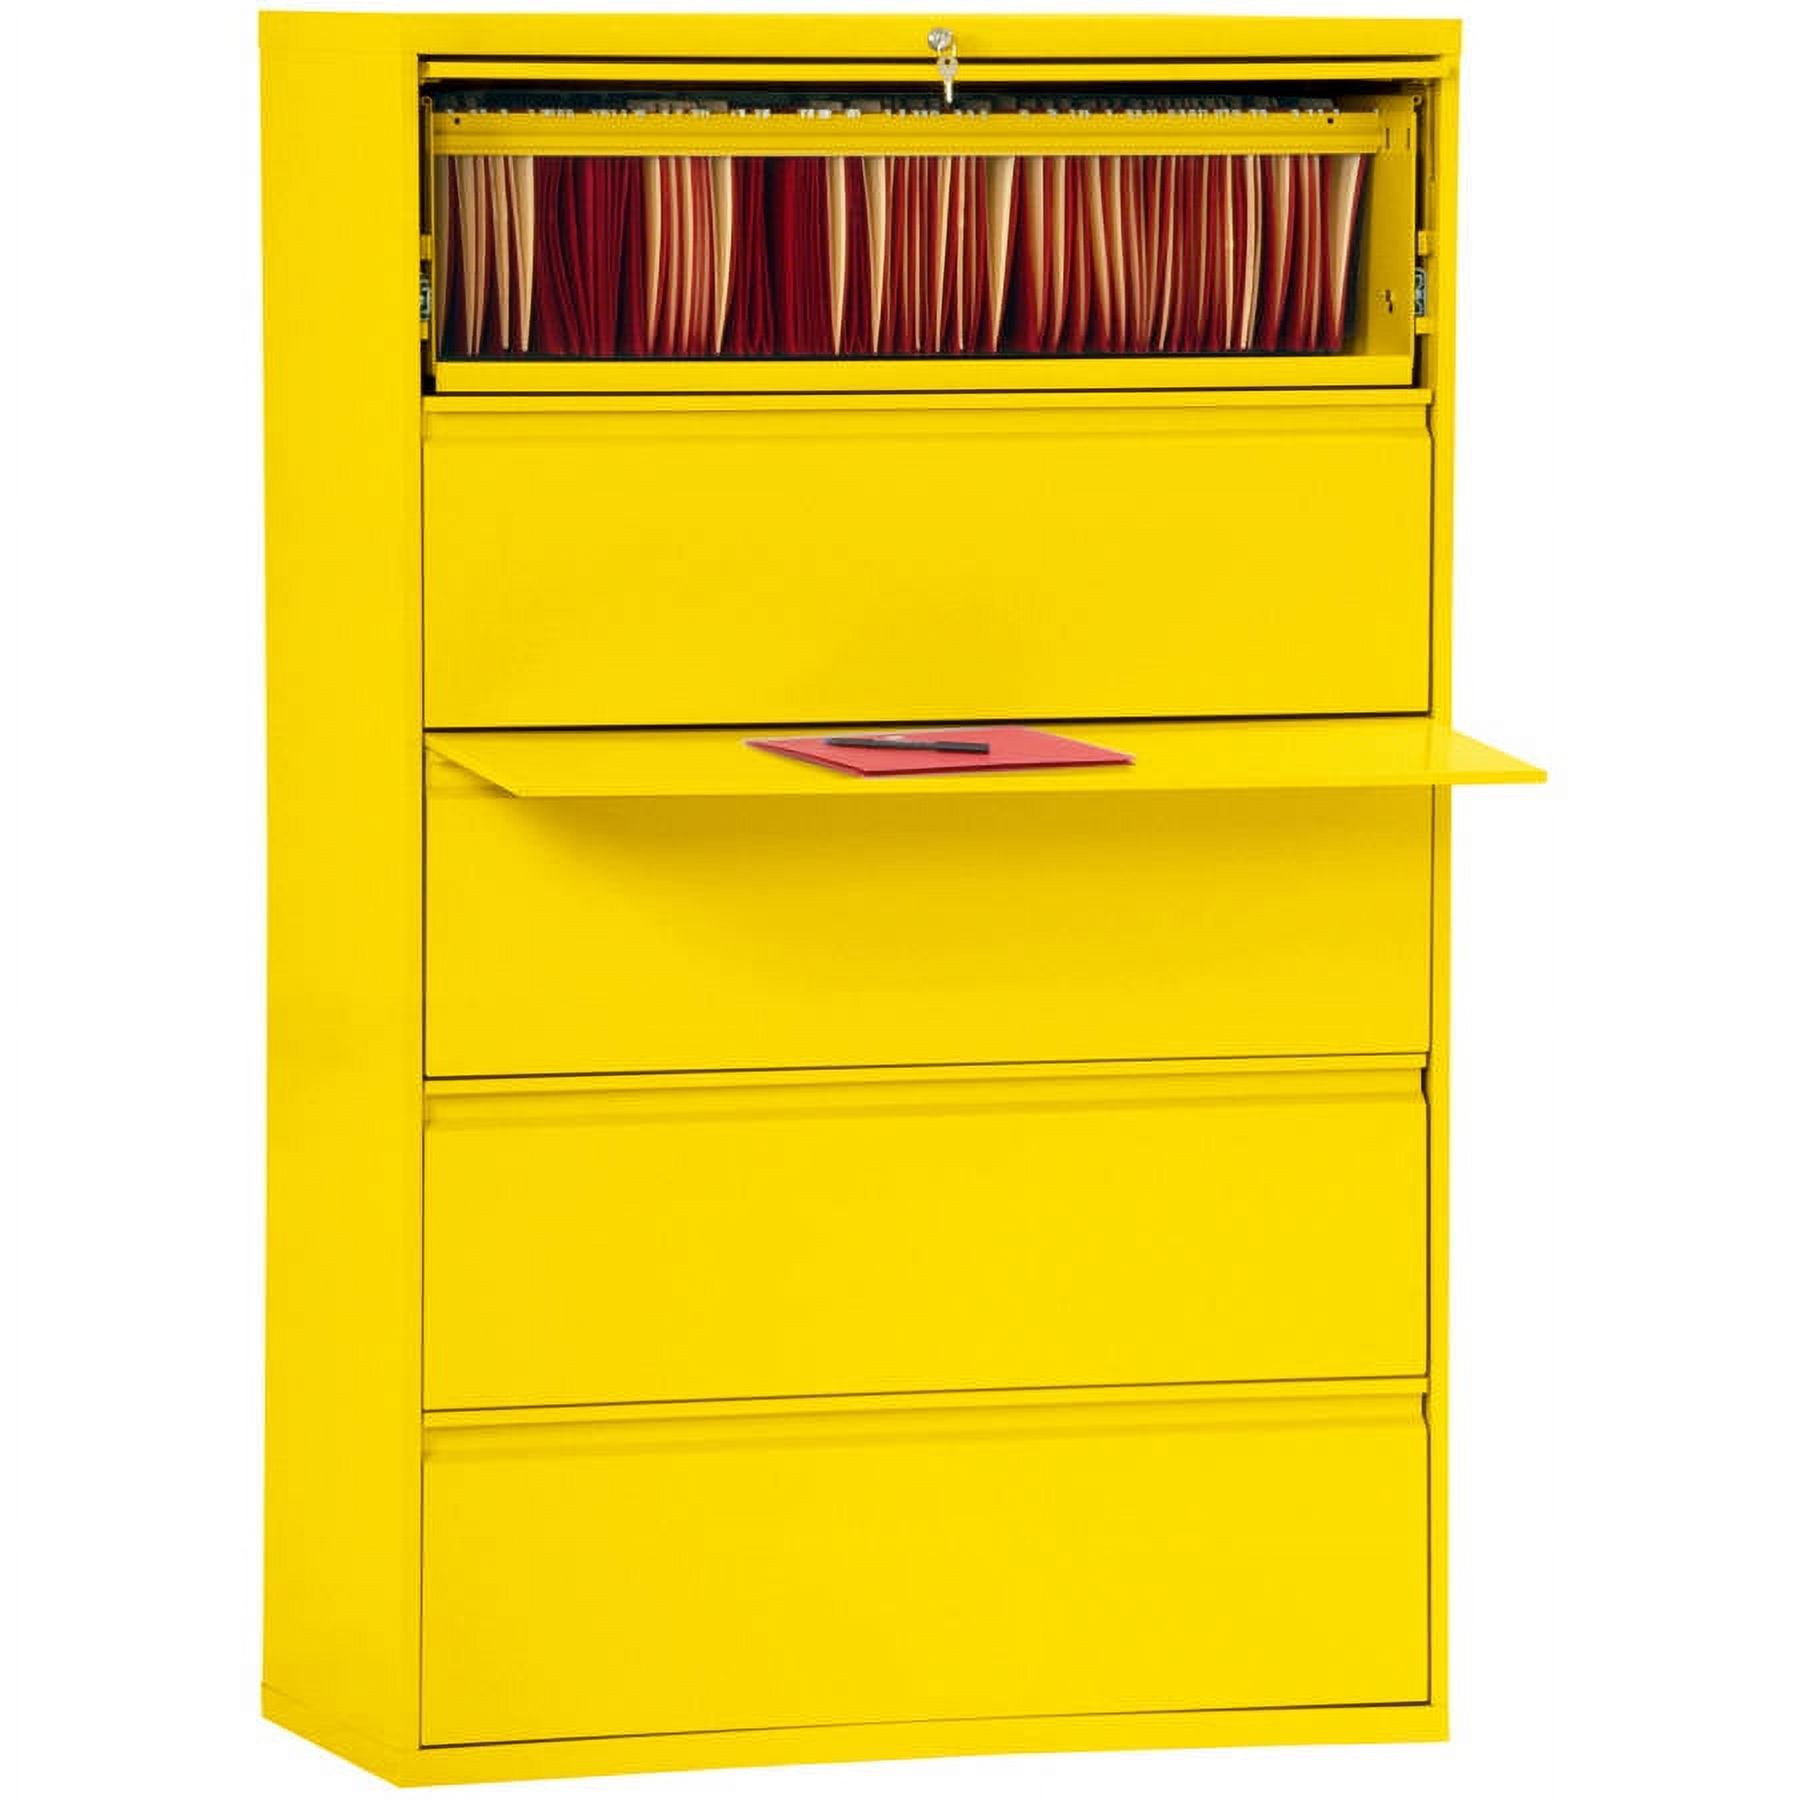 Sandusky Lee 800 Series 42" 5-Drawer Full Pull Lateral File, Yellow - image 1 of 1